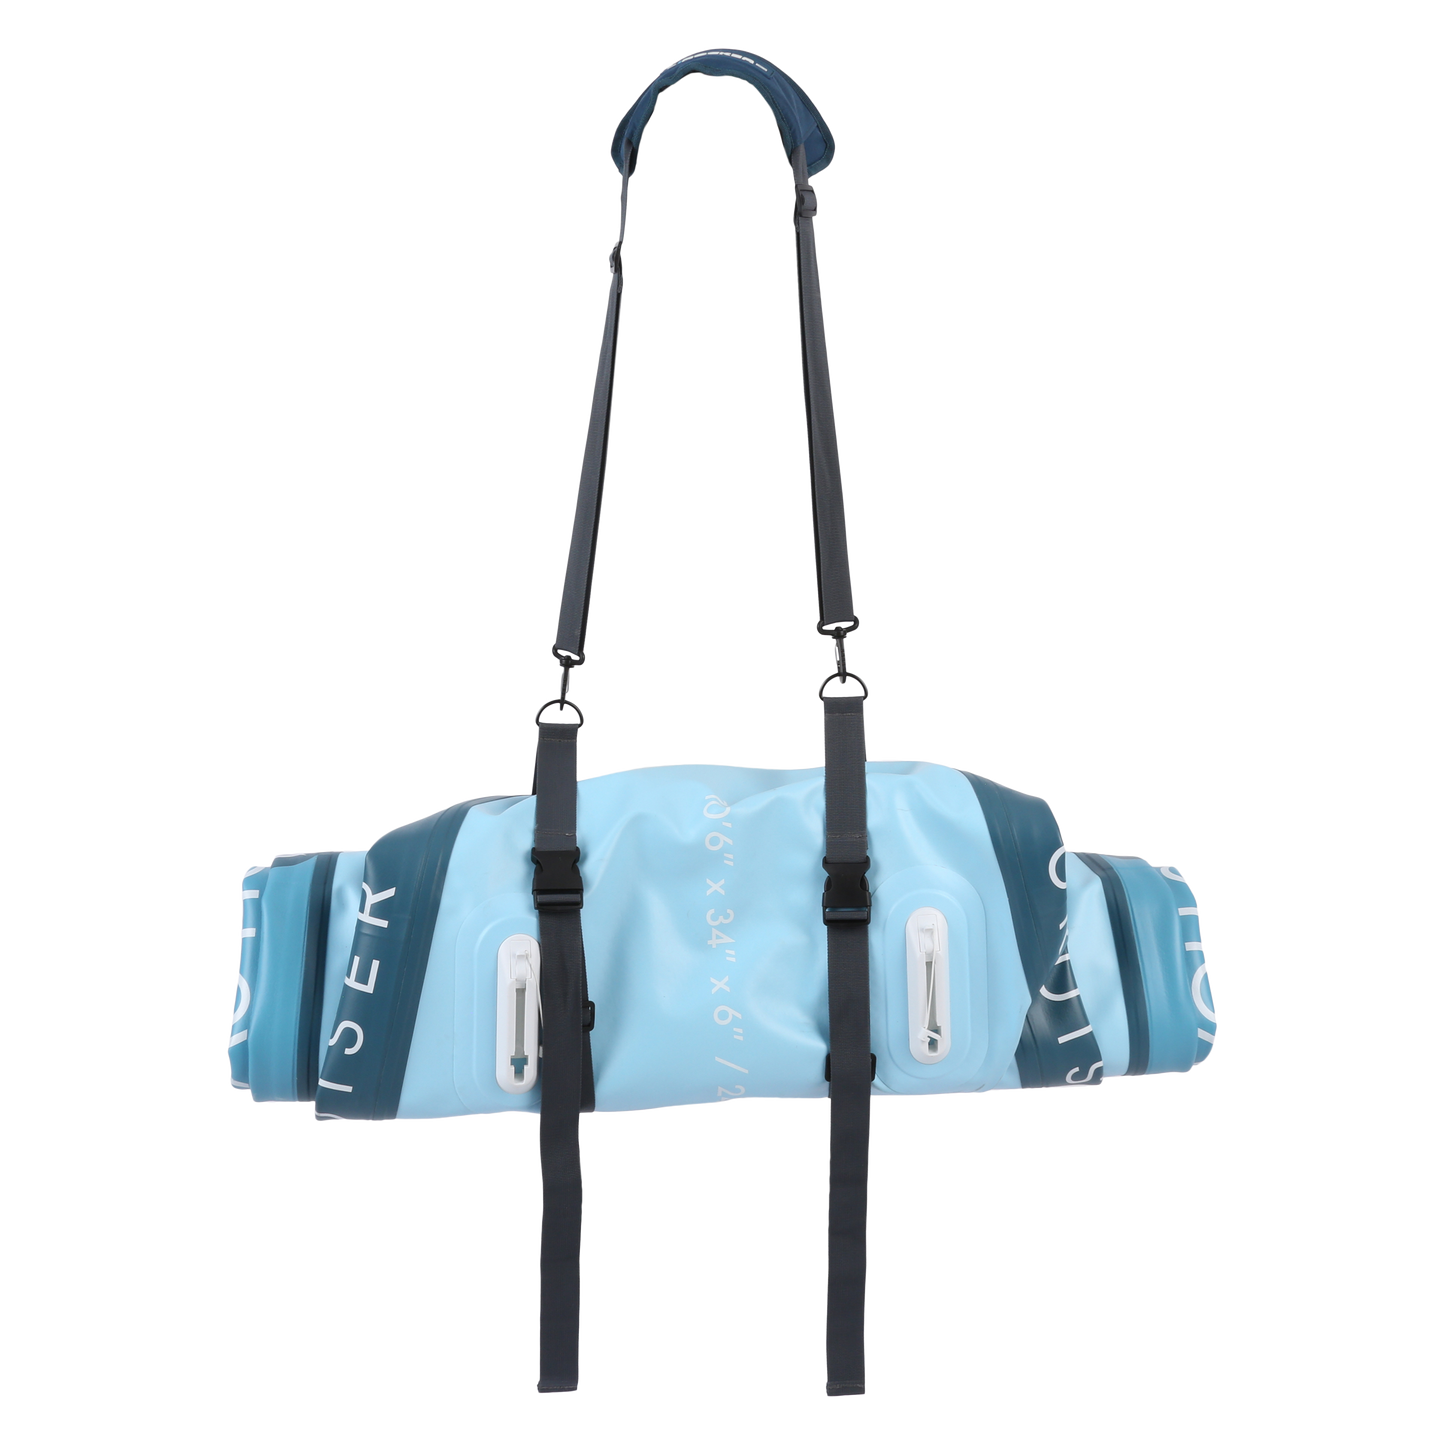 Universal Paddle Board Carry Strap